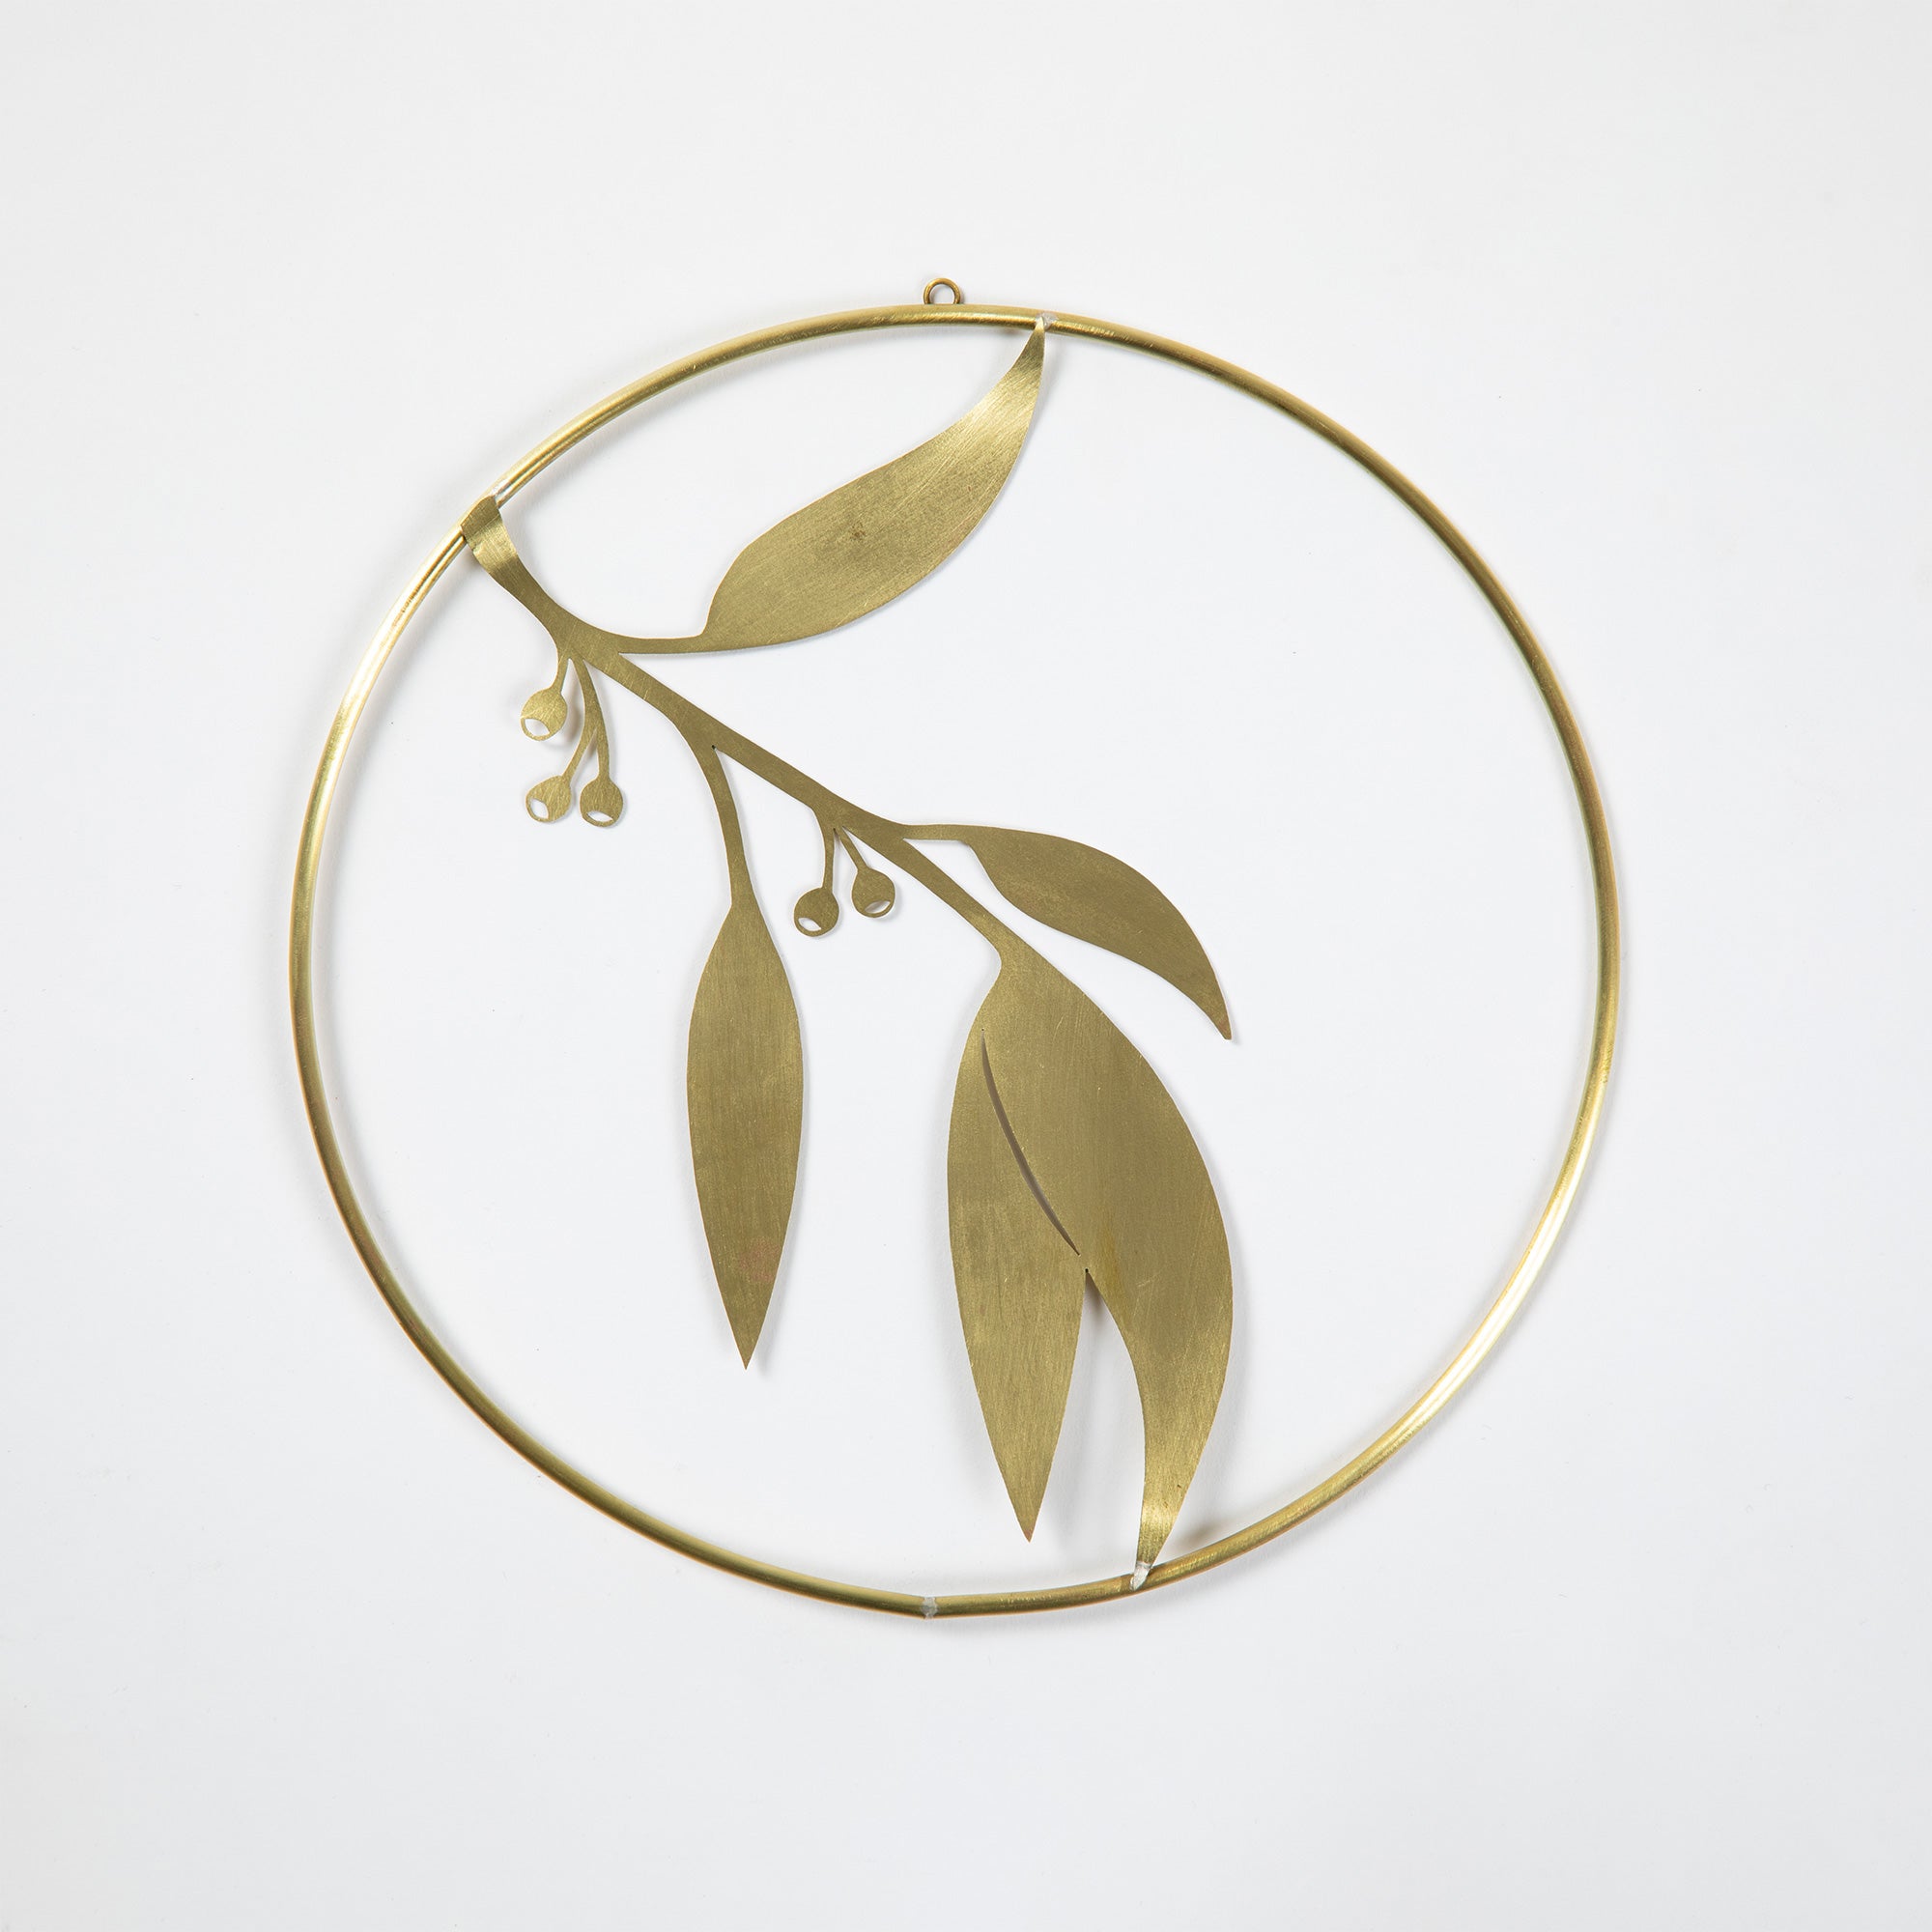 Hand Crafted Leaves Metal Wall Decor - Eucalyptus Branch